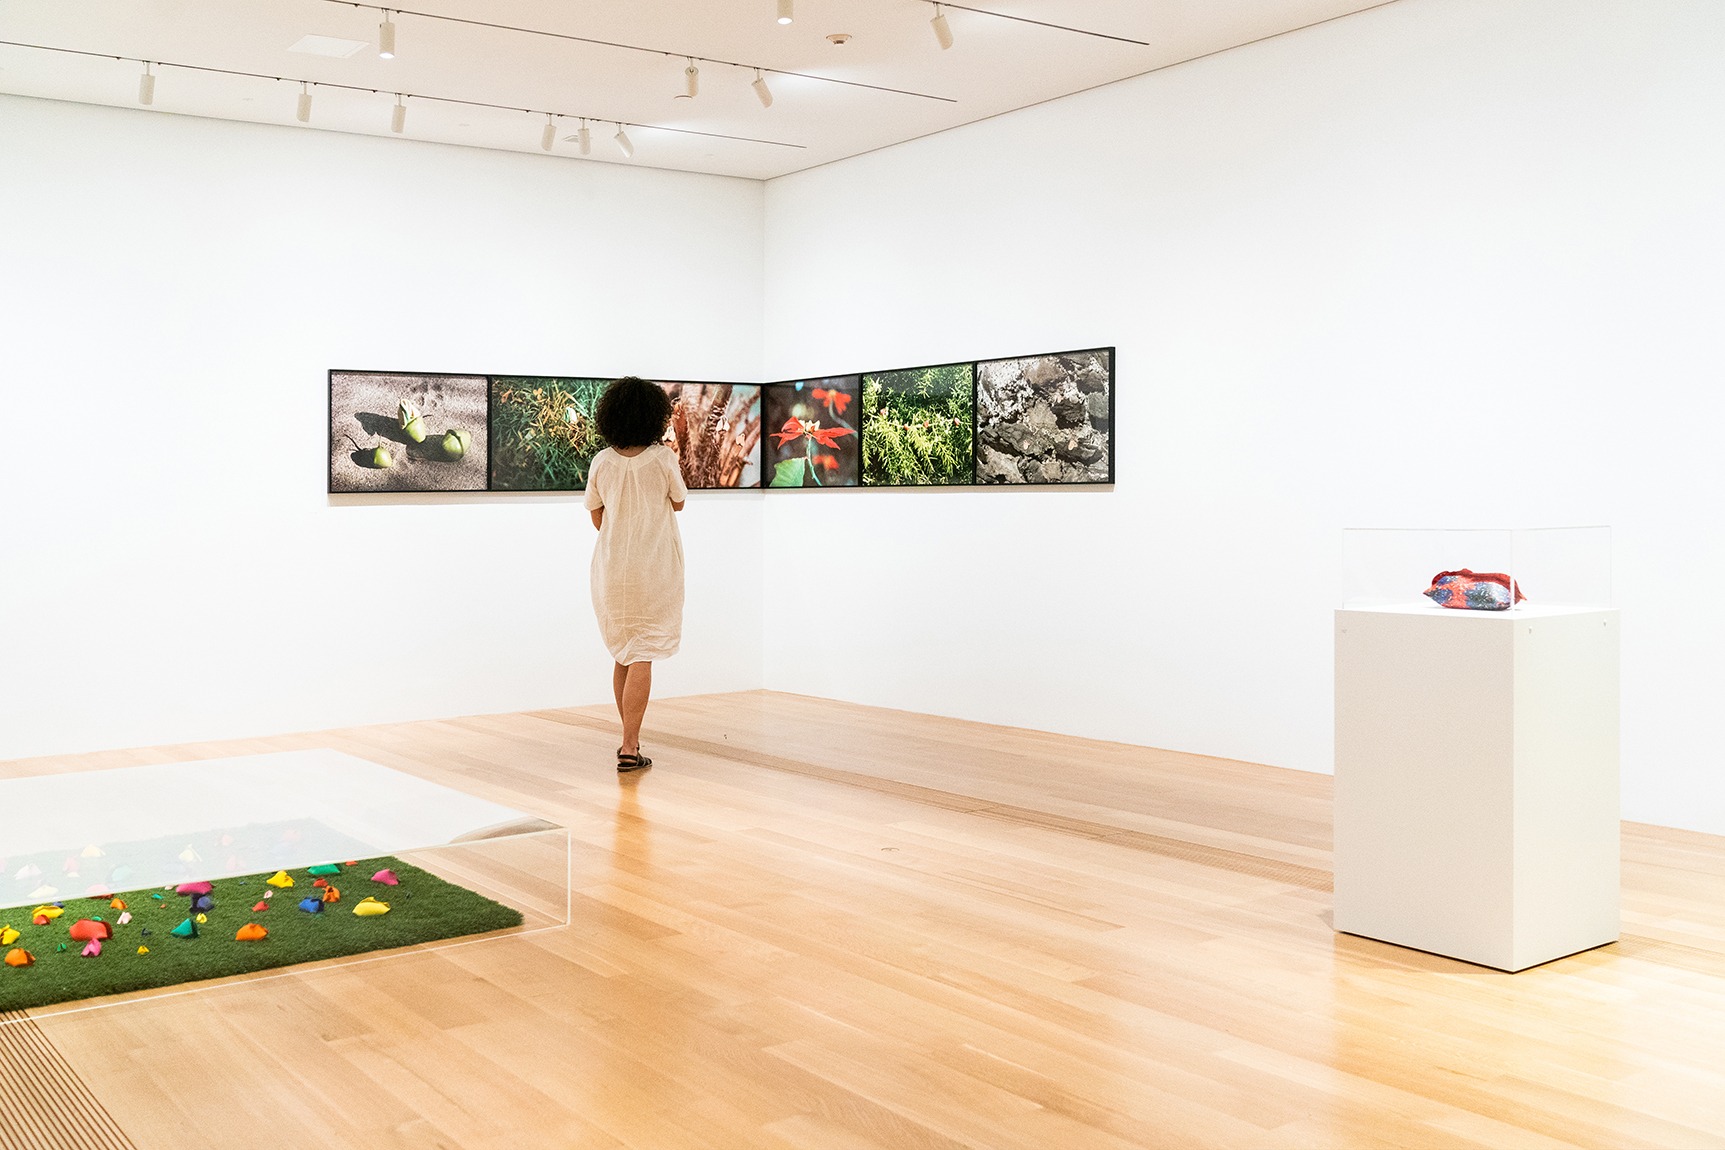 A visitor in the lower west gallery viewing work by artist Hannah Wilke, including photographs installed in the far corner, a ground work, and a sculpture on a pedestal